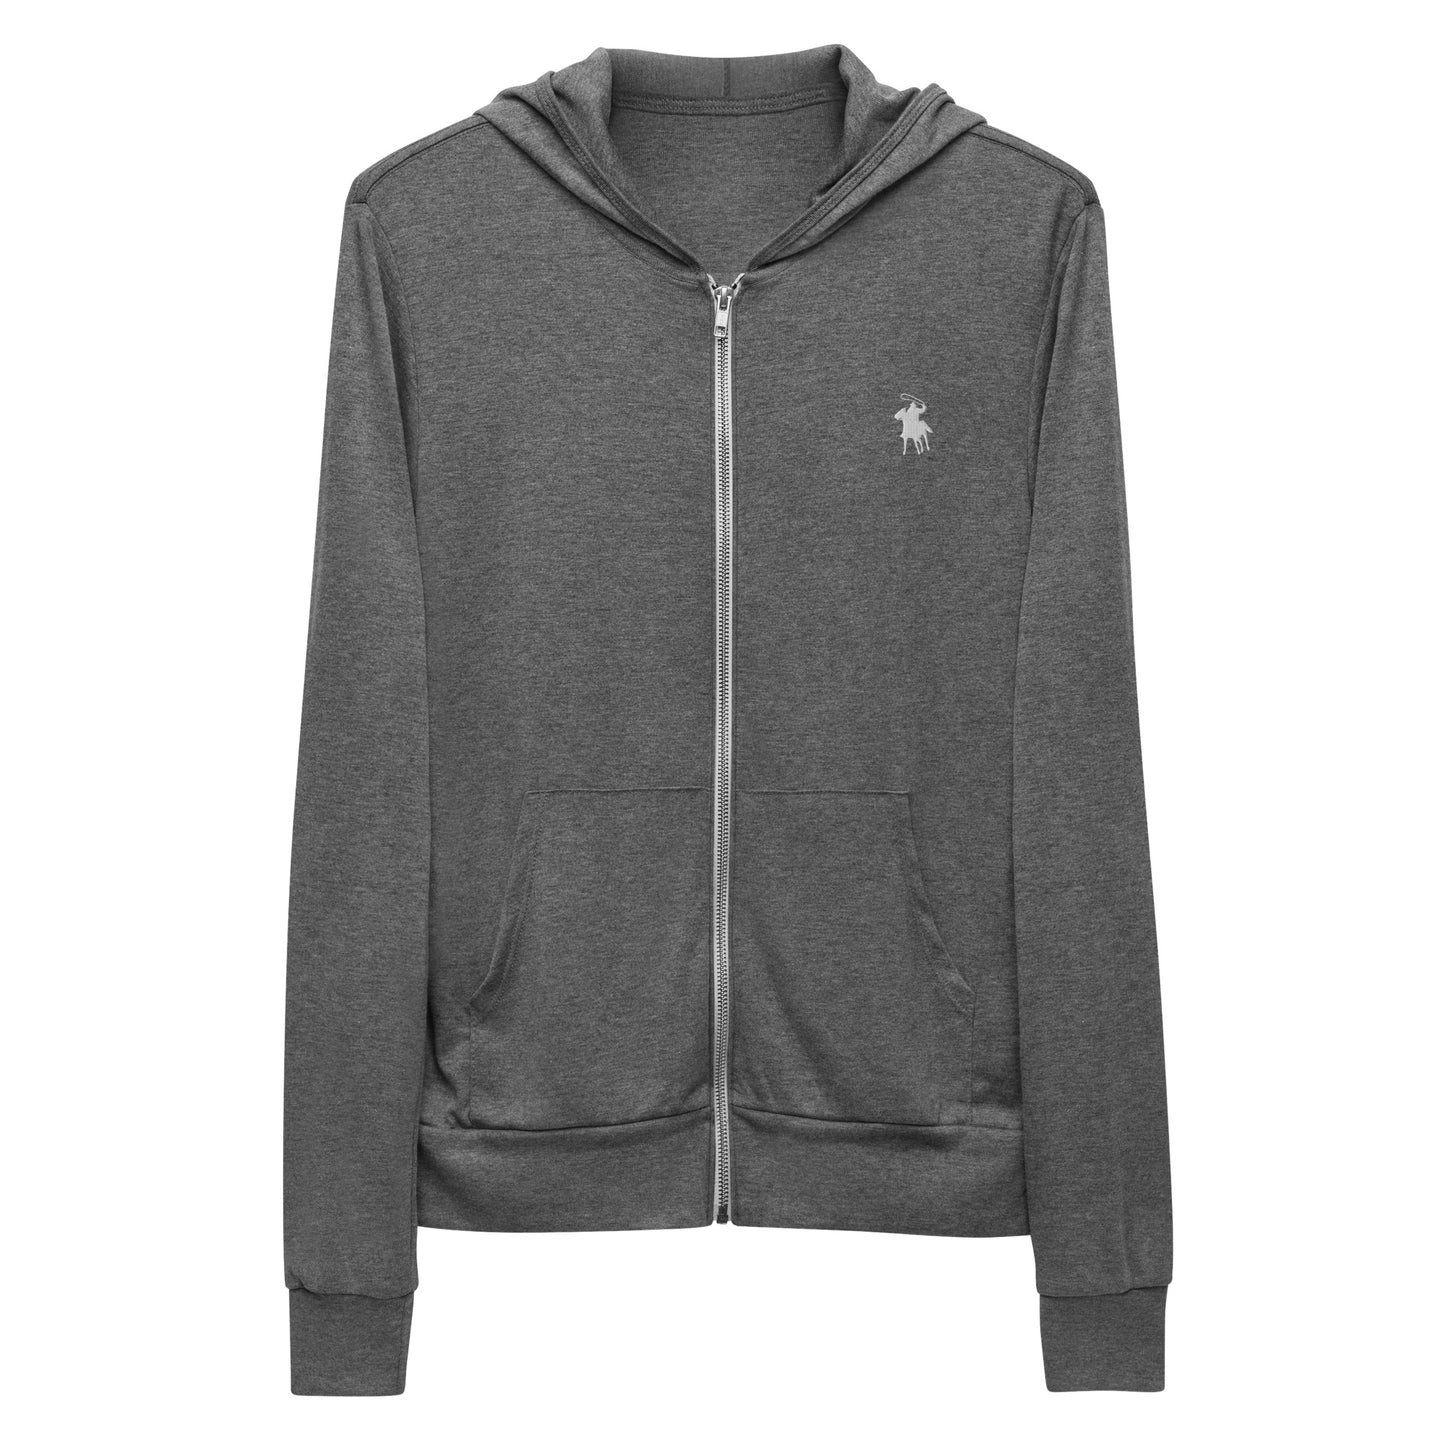 Country Polo Zip Hoodie (Grey Triblend)